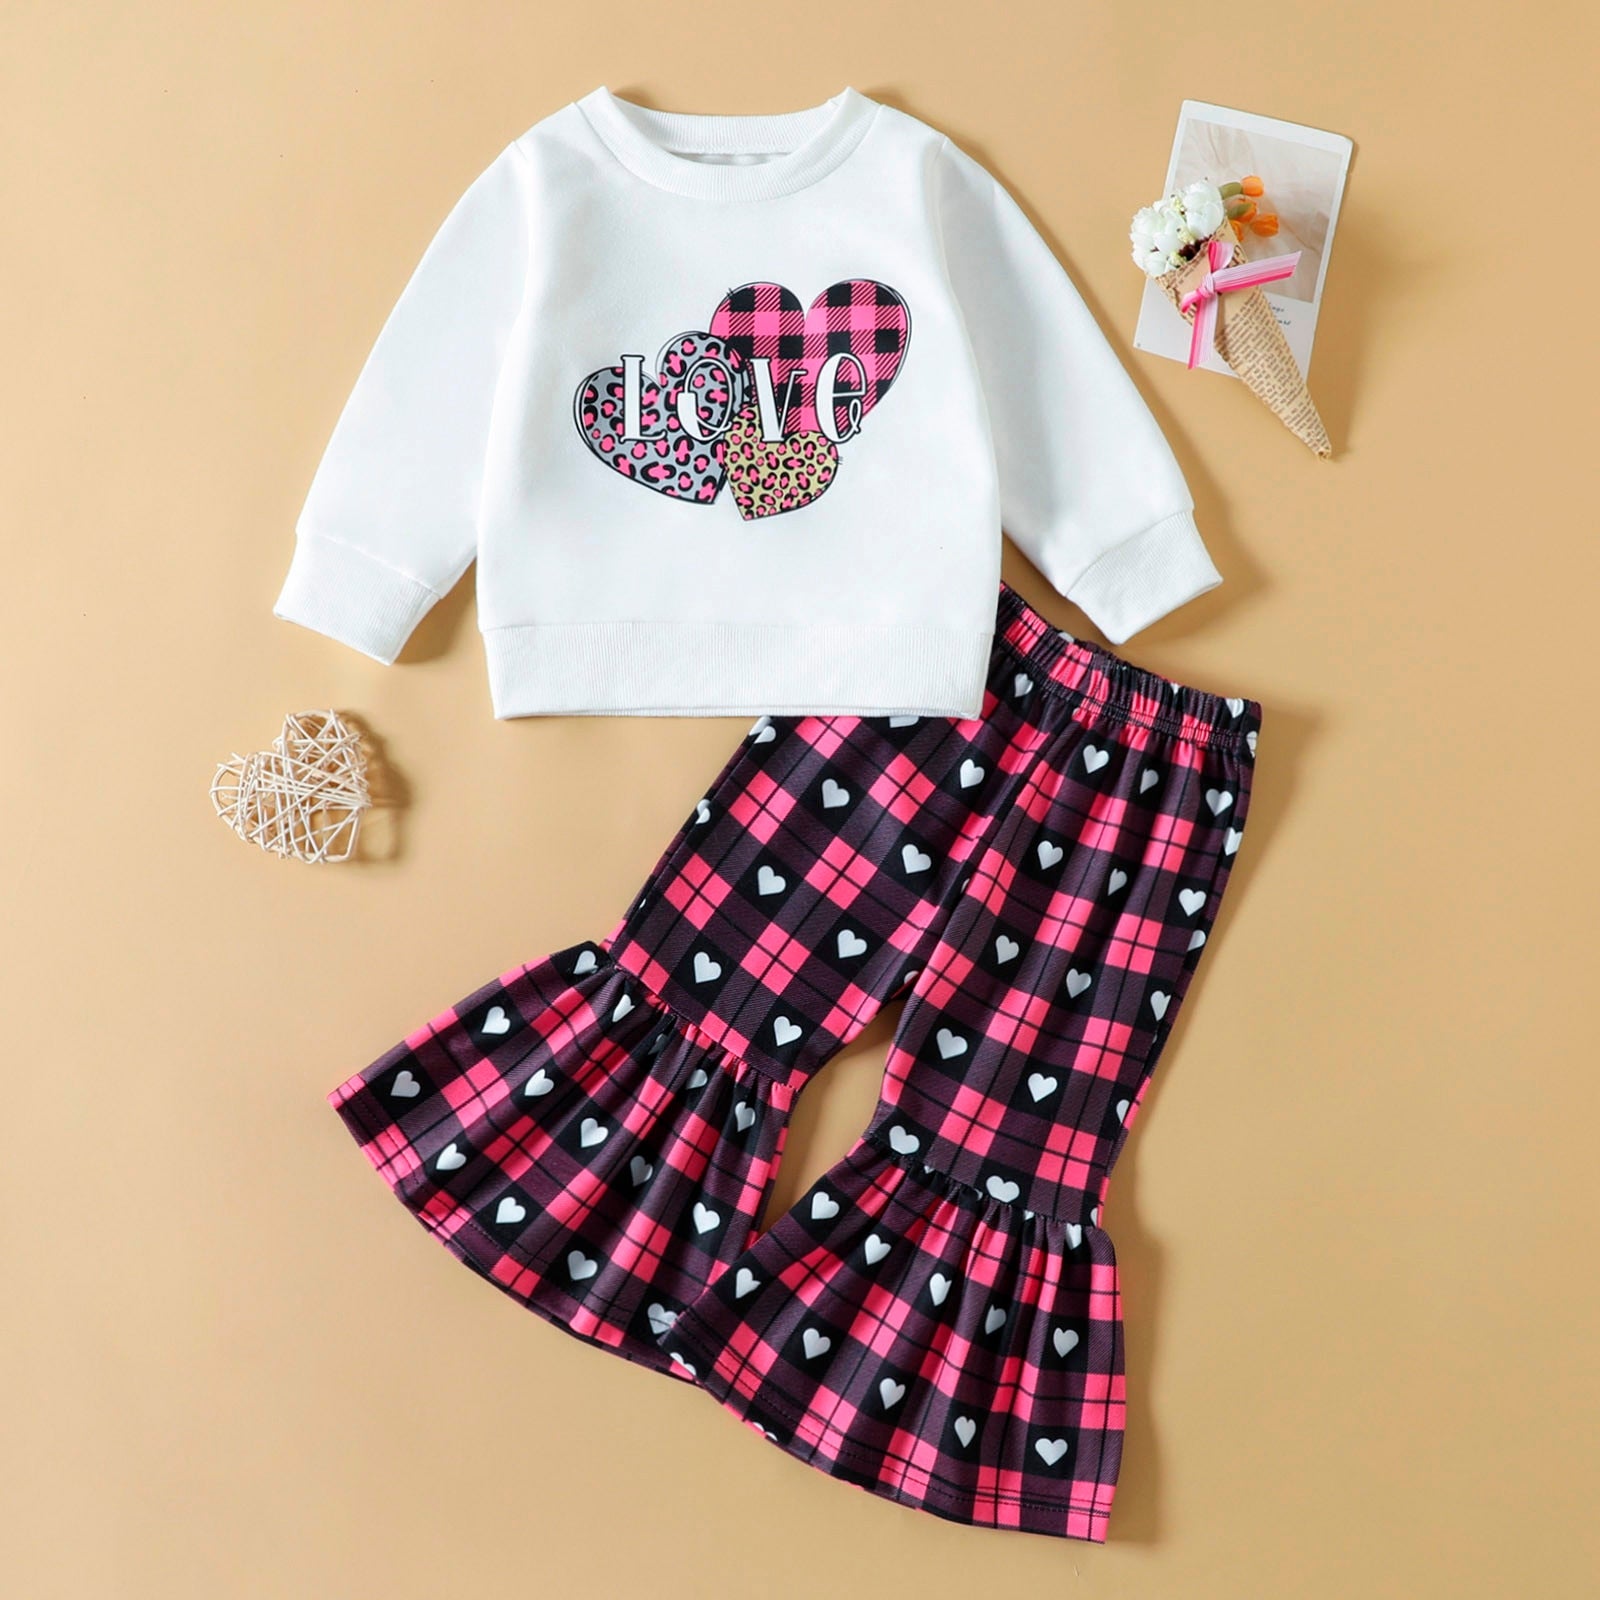 Toddler Baby Girls Costume Outfits: Long Sleeve Tops + Heart Printed Flare Pants Sets